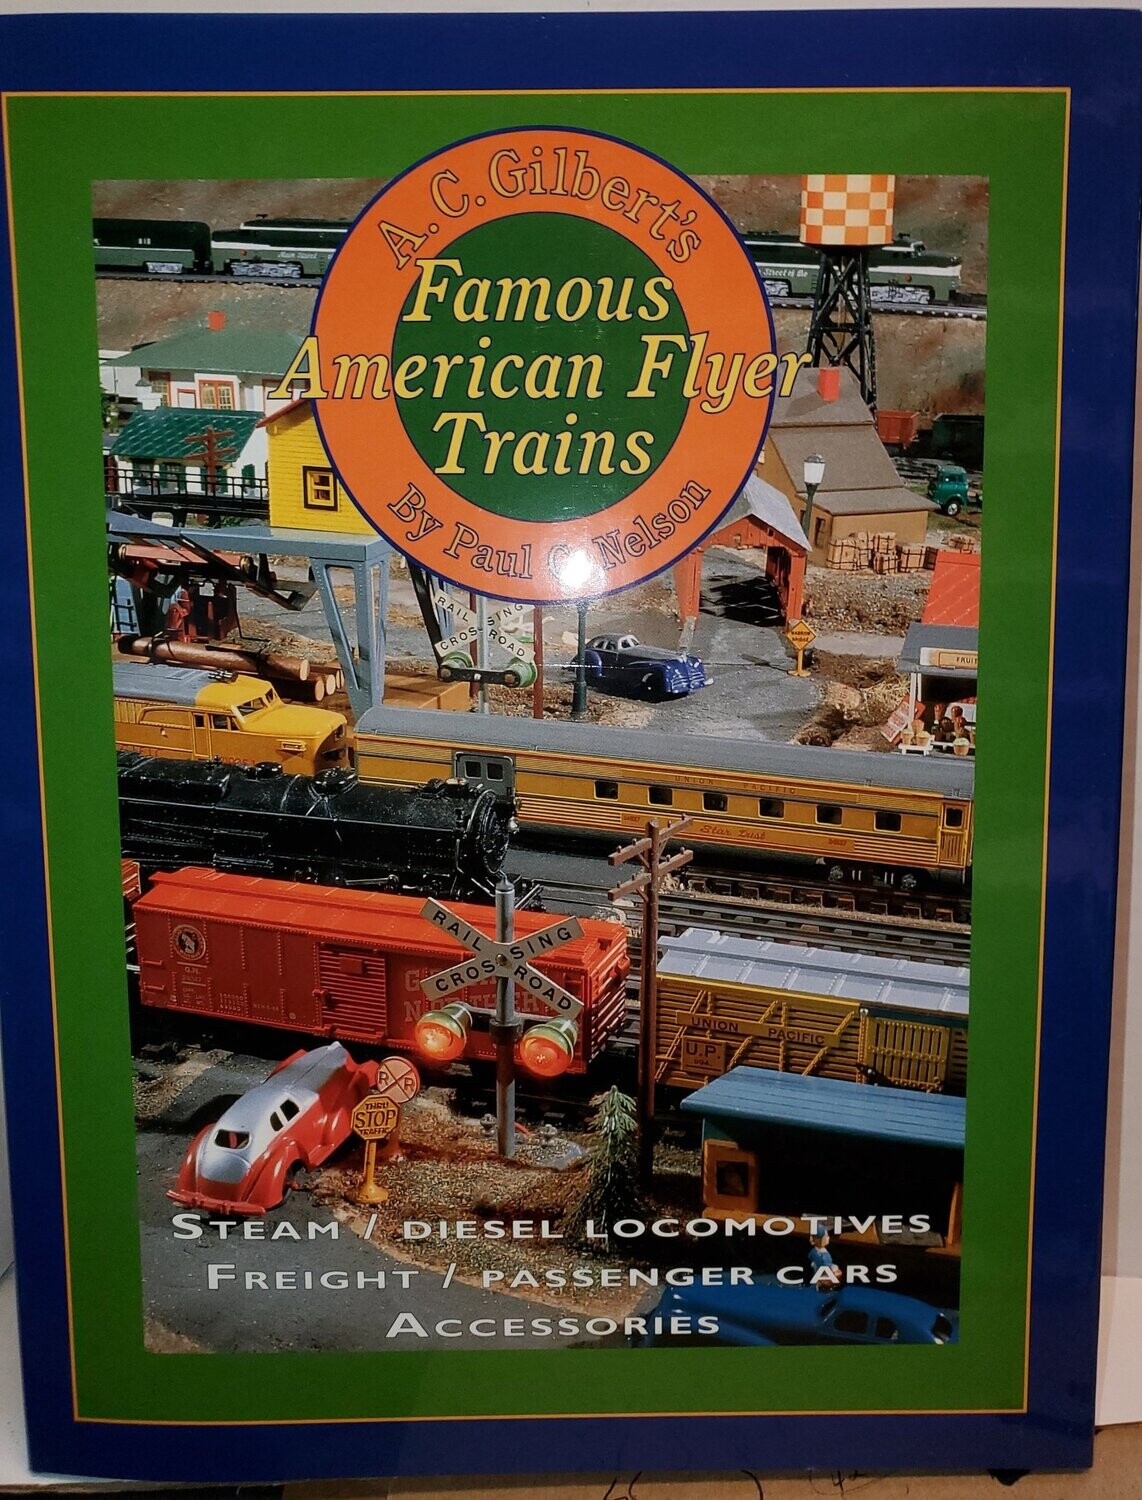 BOOK: "AC GILBERT'S FAMOUS AF TRAINS" by Paul Nelson